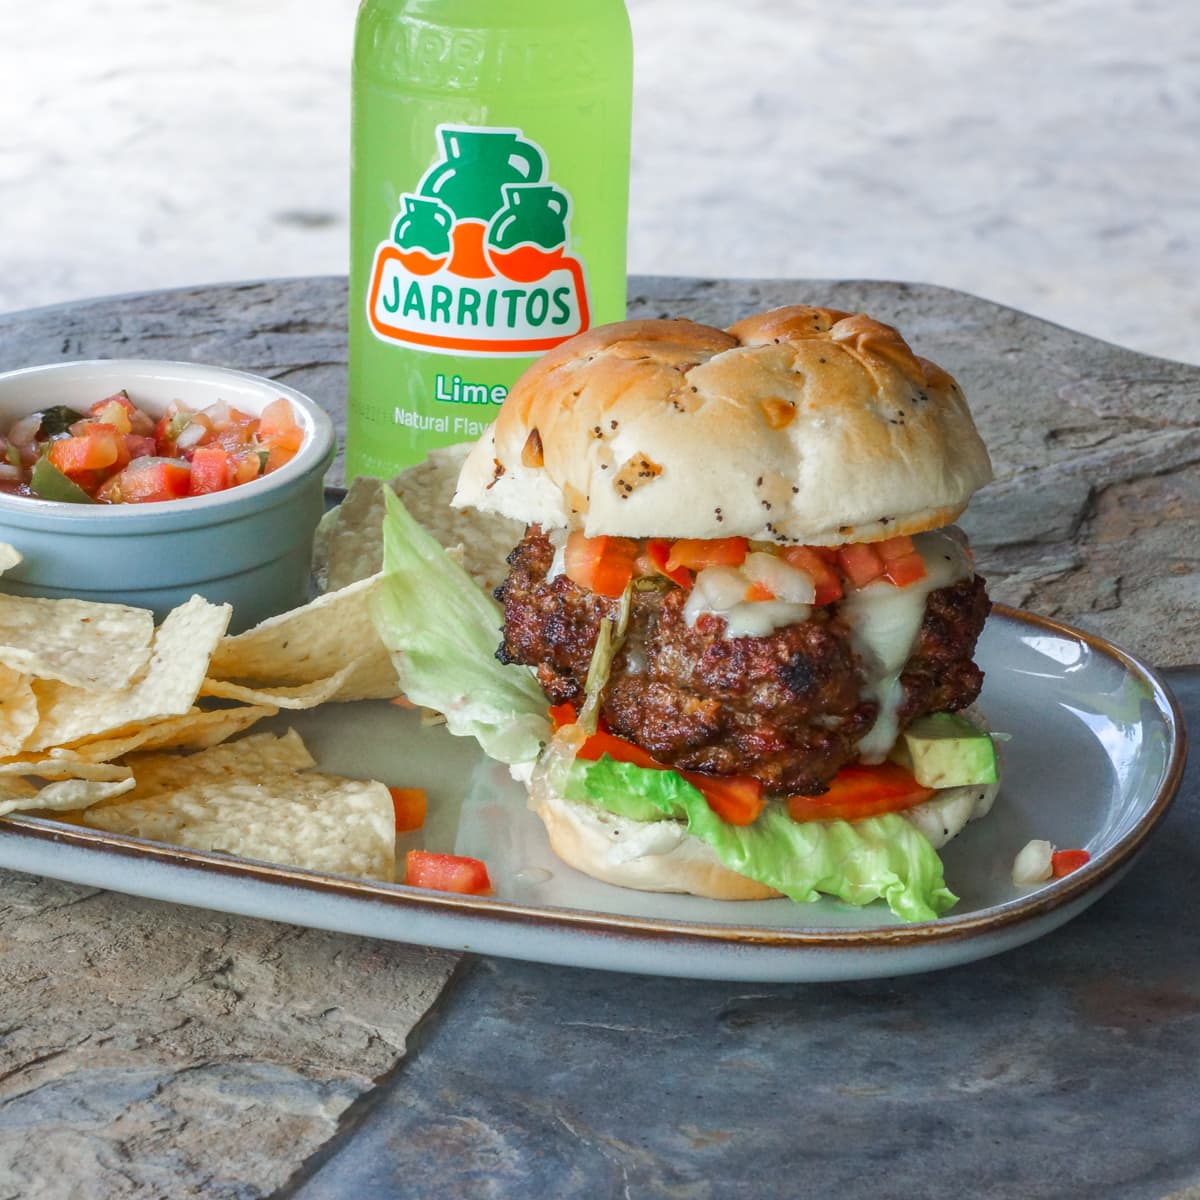 Oaxaca cheese stuffed Mexican Chorizo Burger on a plate with chips and Pico de Gallo.